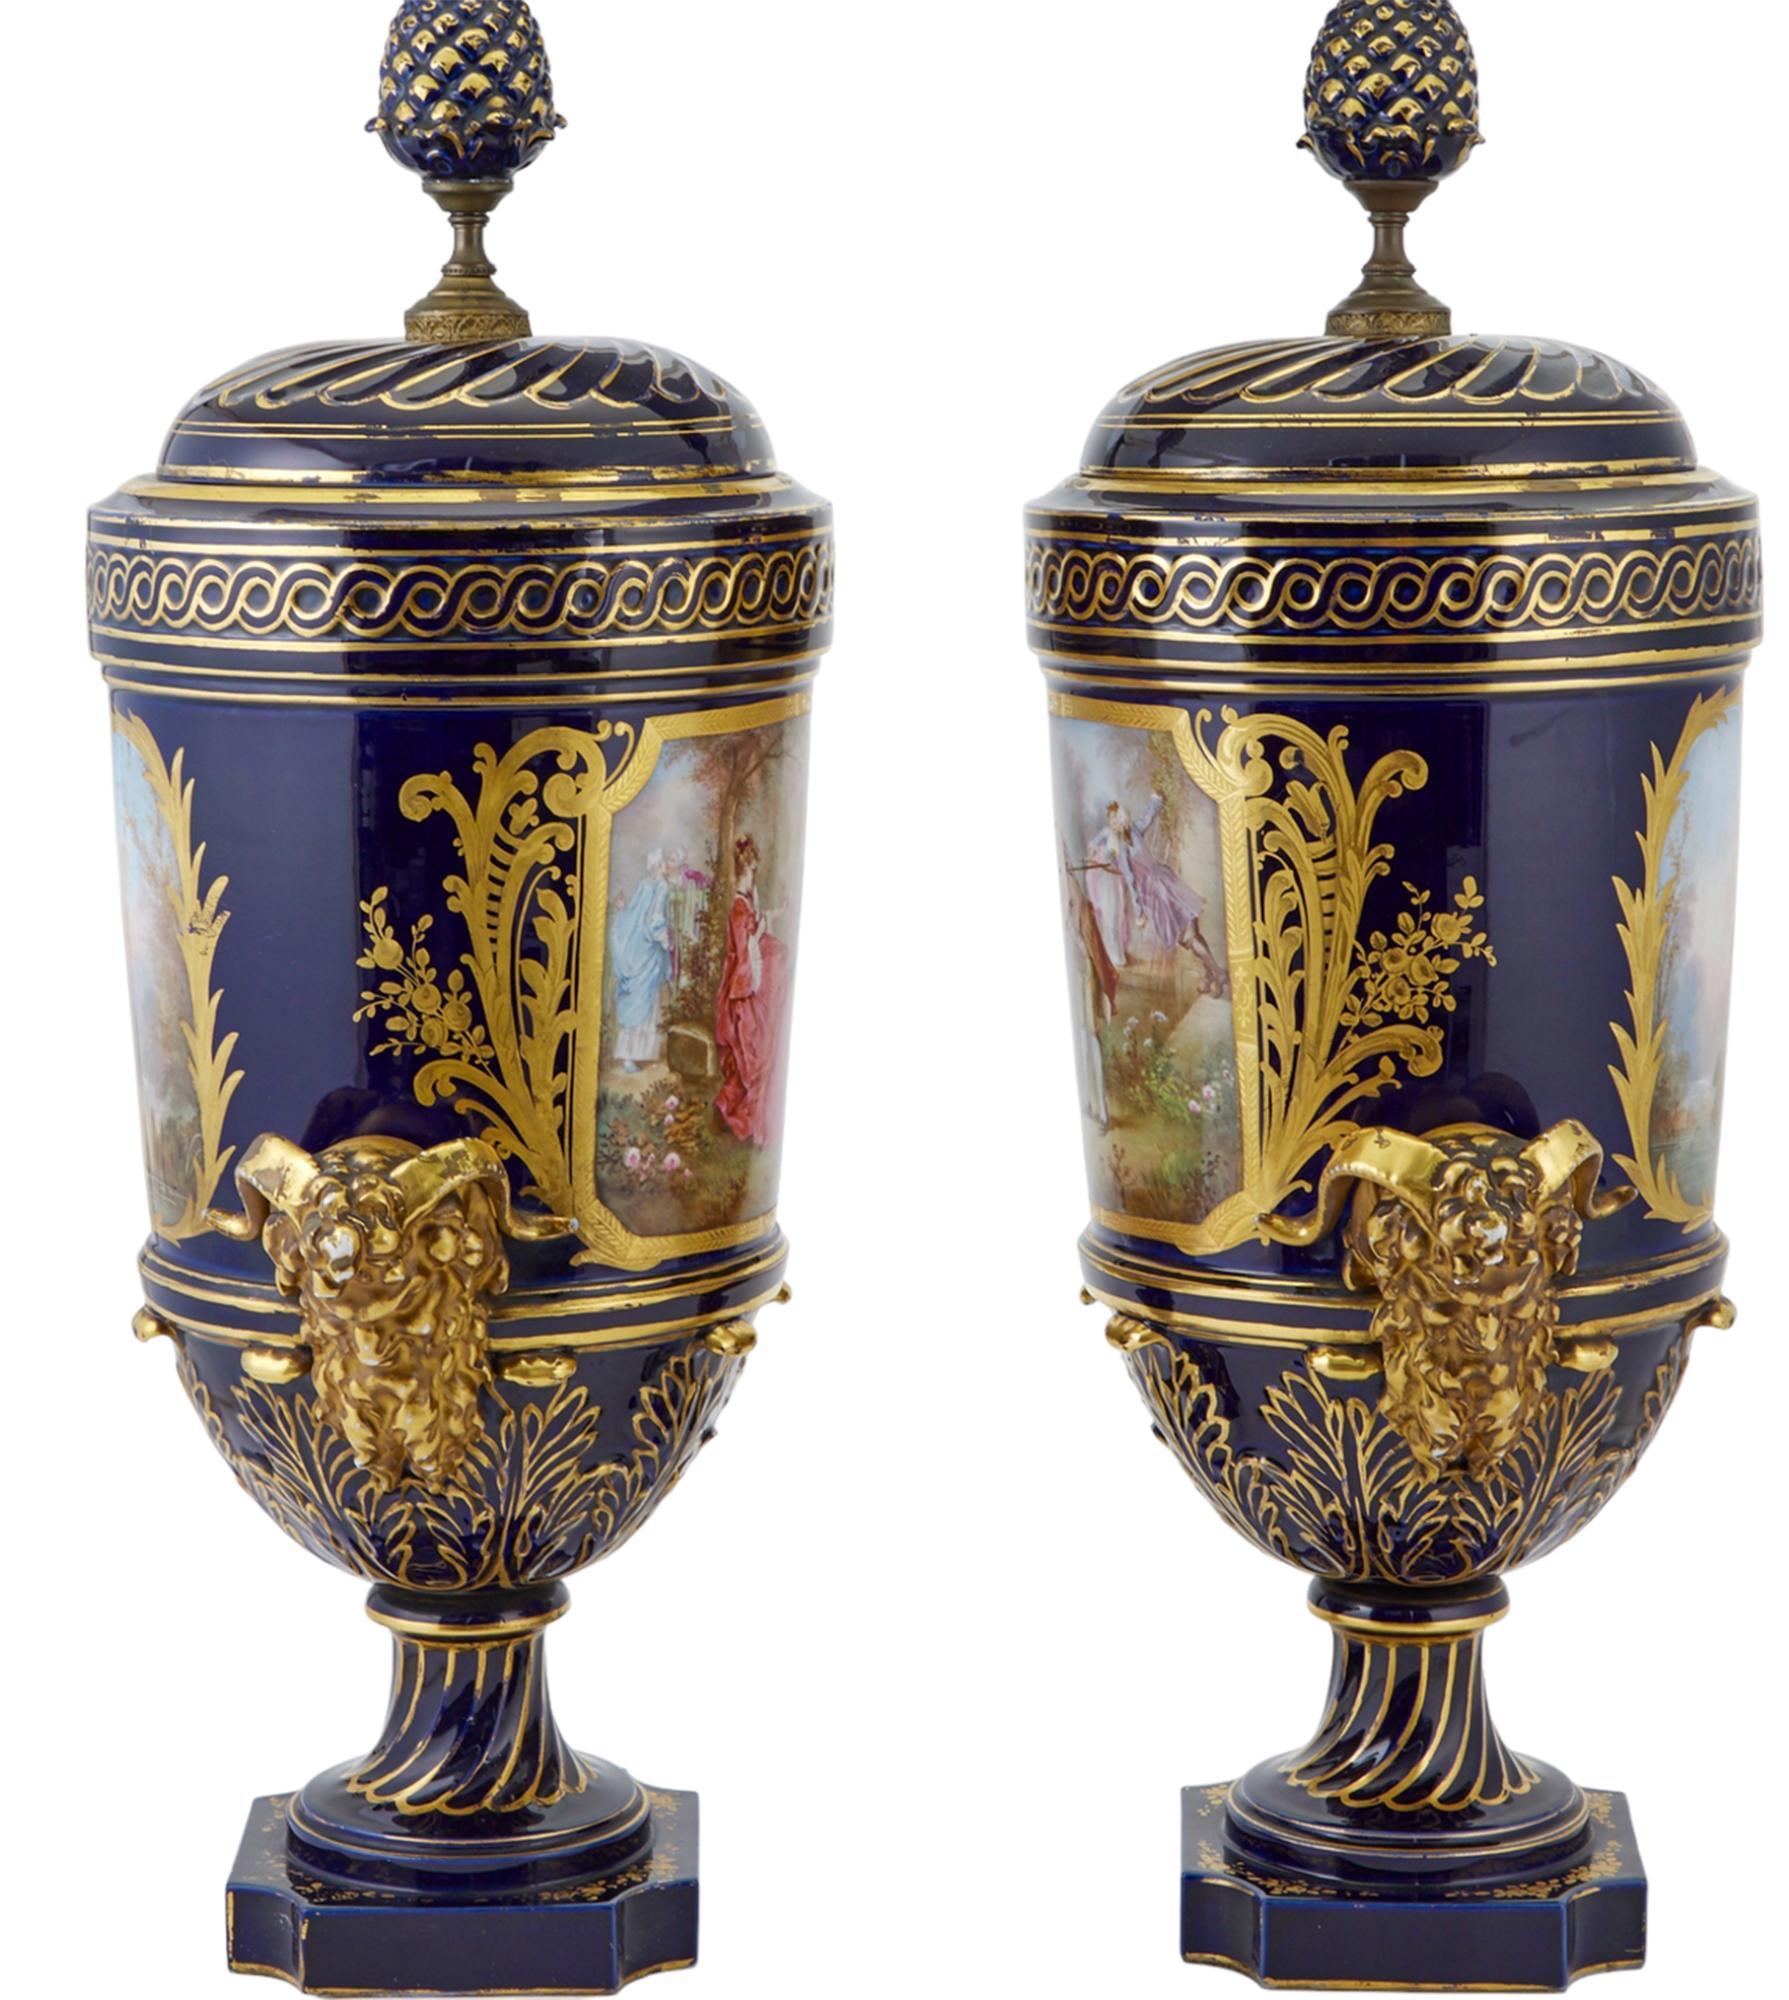 Pair of Sevres Style Gilt and Polychrome Decorated Porcelain Two-Handled Urns In Good Condition For Sale In New York, NY